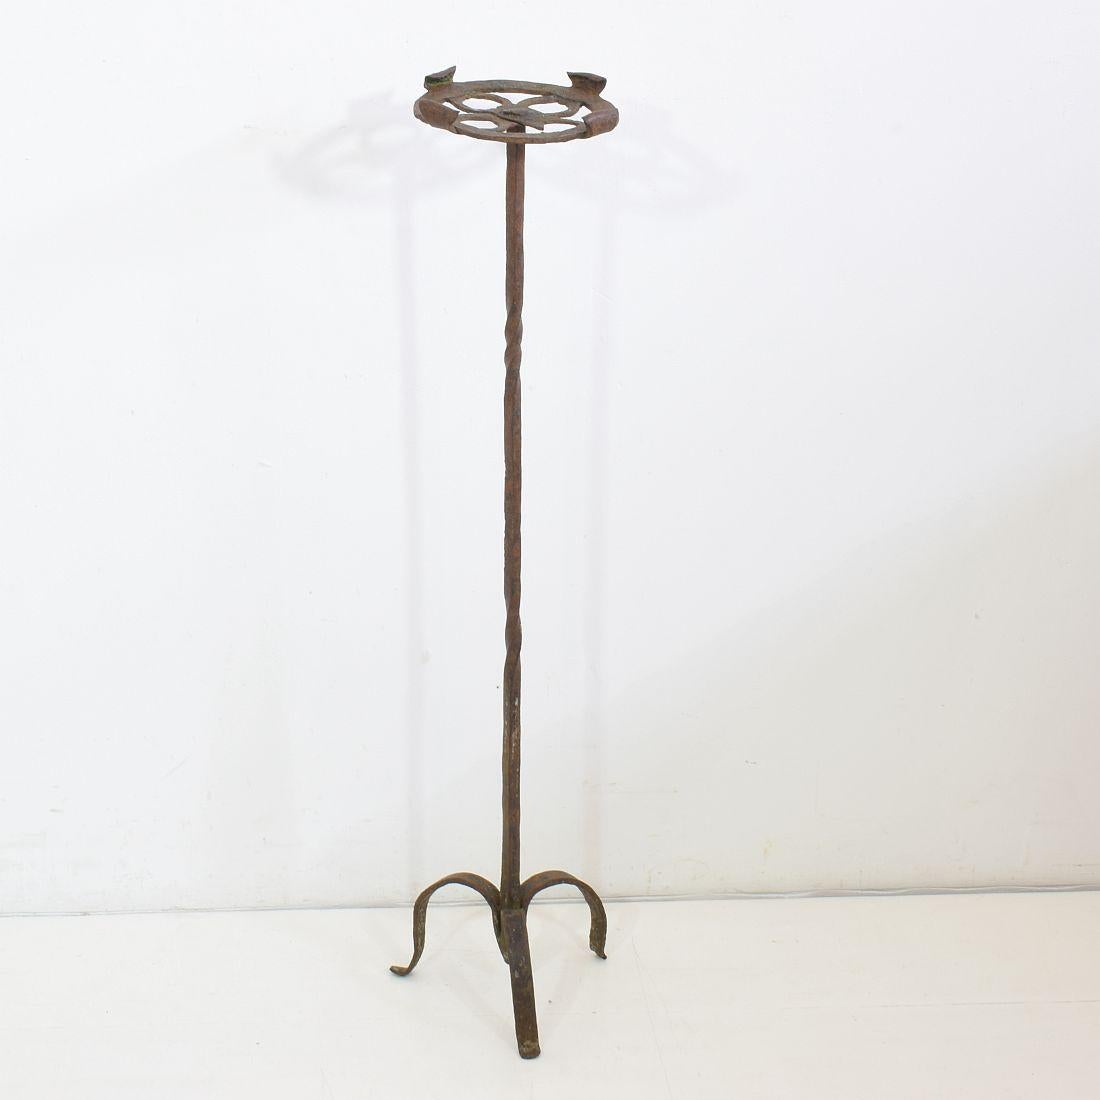 Rustic 17th-18th Century Spanish Hand Forged Iron Candleholder For Sale